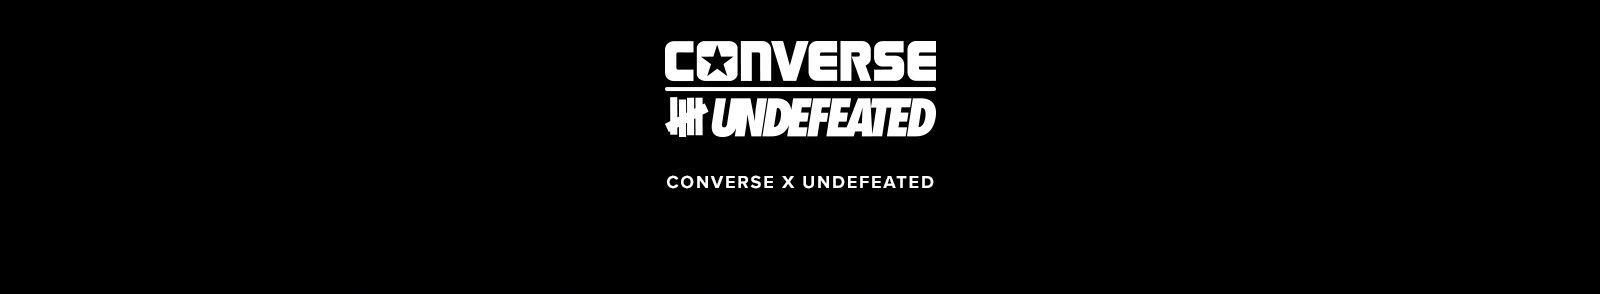 Nike Undefeated Logo - Converse Limited Edition Collection One Star. Converse.com